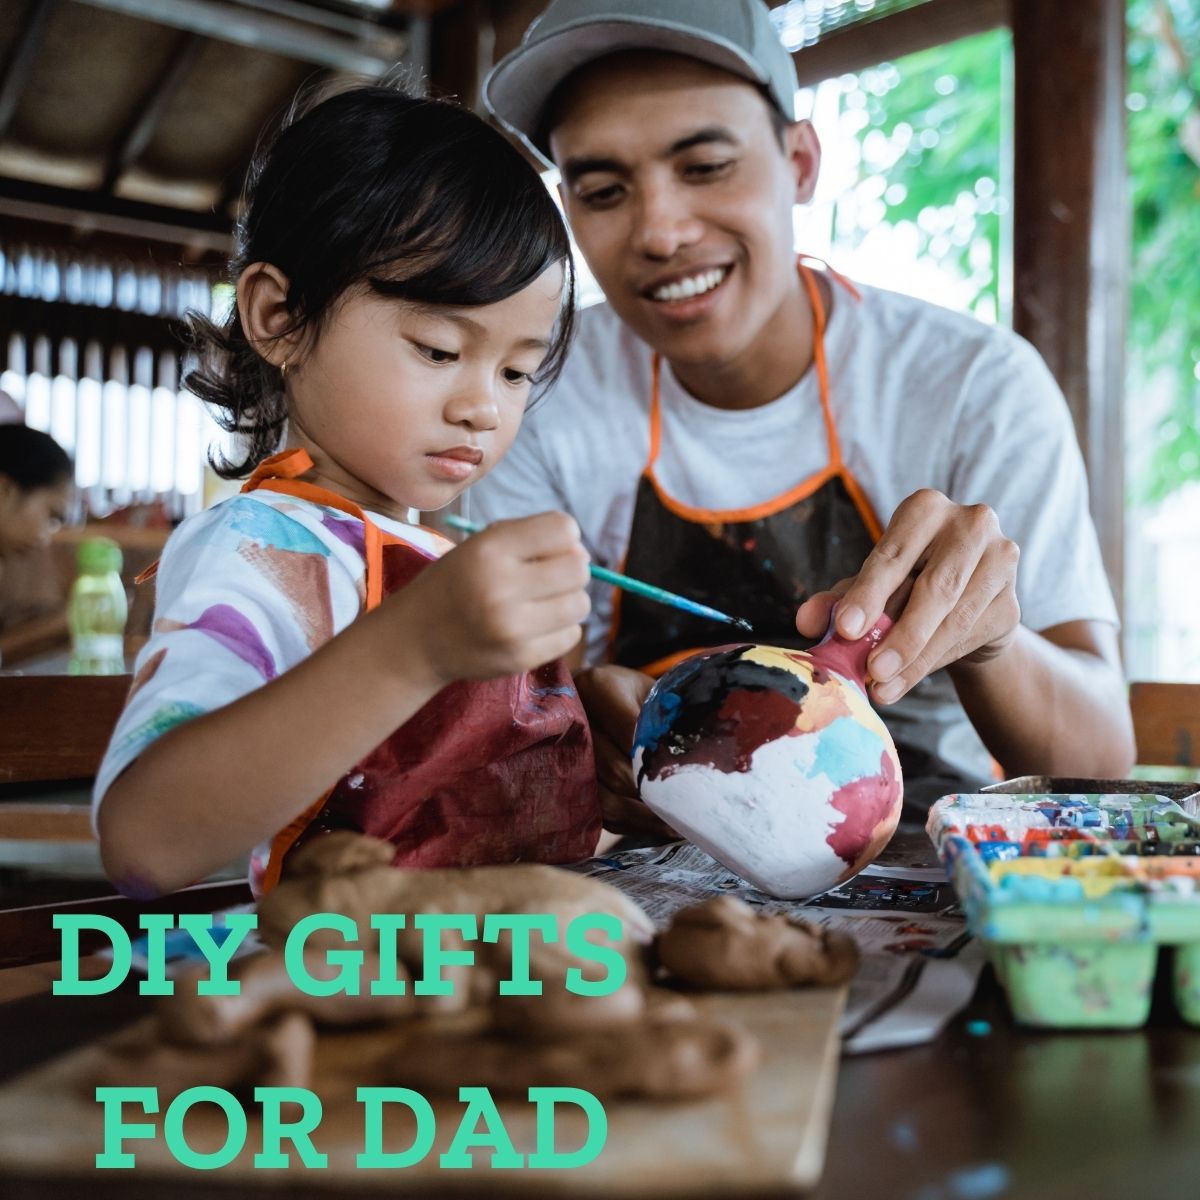 DIY Gifts To Make For Dad For Father's Day - Darn Good Yarn